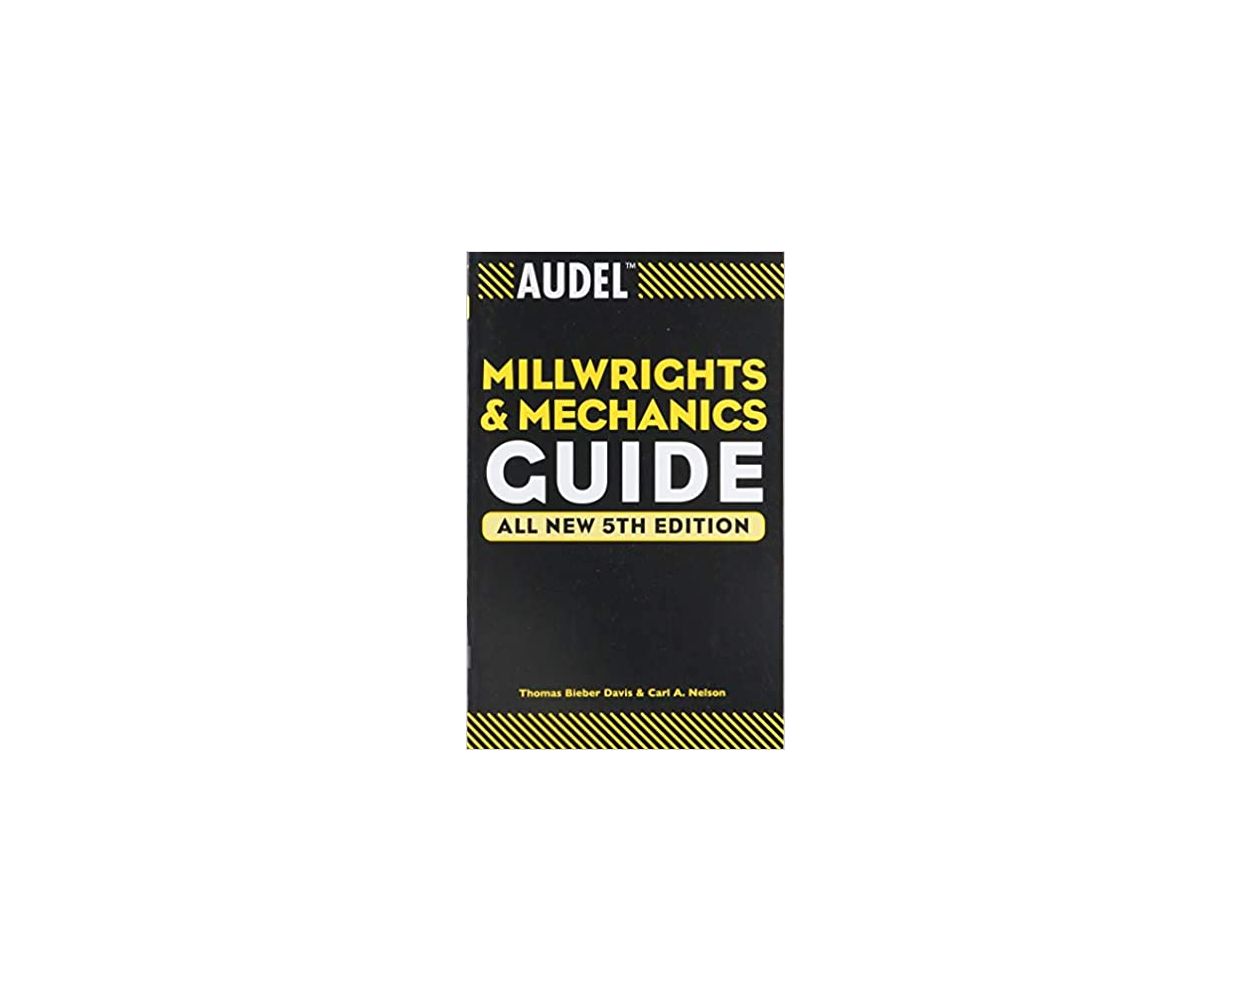 Audel Millwrights and Mechanics Guide Builder's Book, Inc.Bookstore